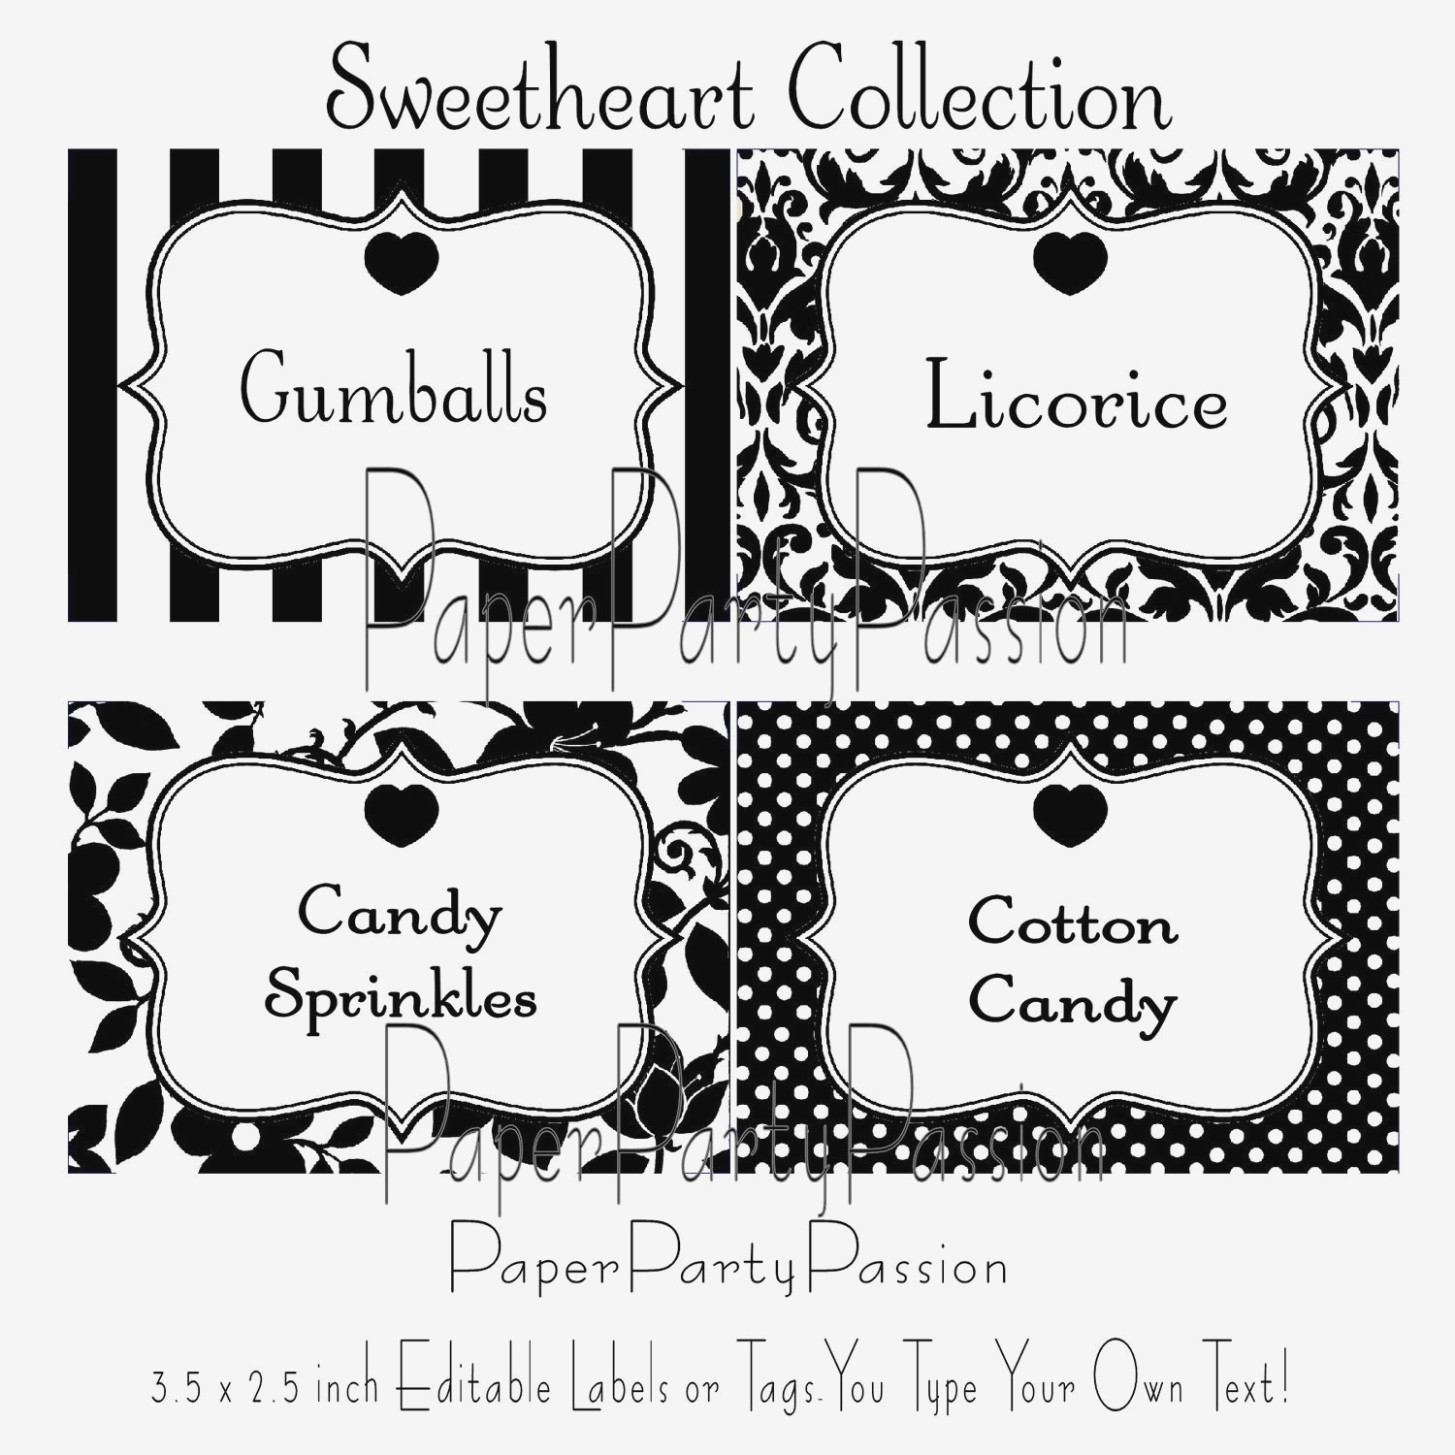 Free Printable Candy Buffet Labels Templates .. – Label Maker Ideas - Free Printable Candy Buffet Labels Templates